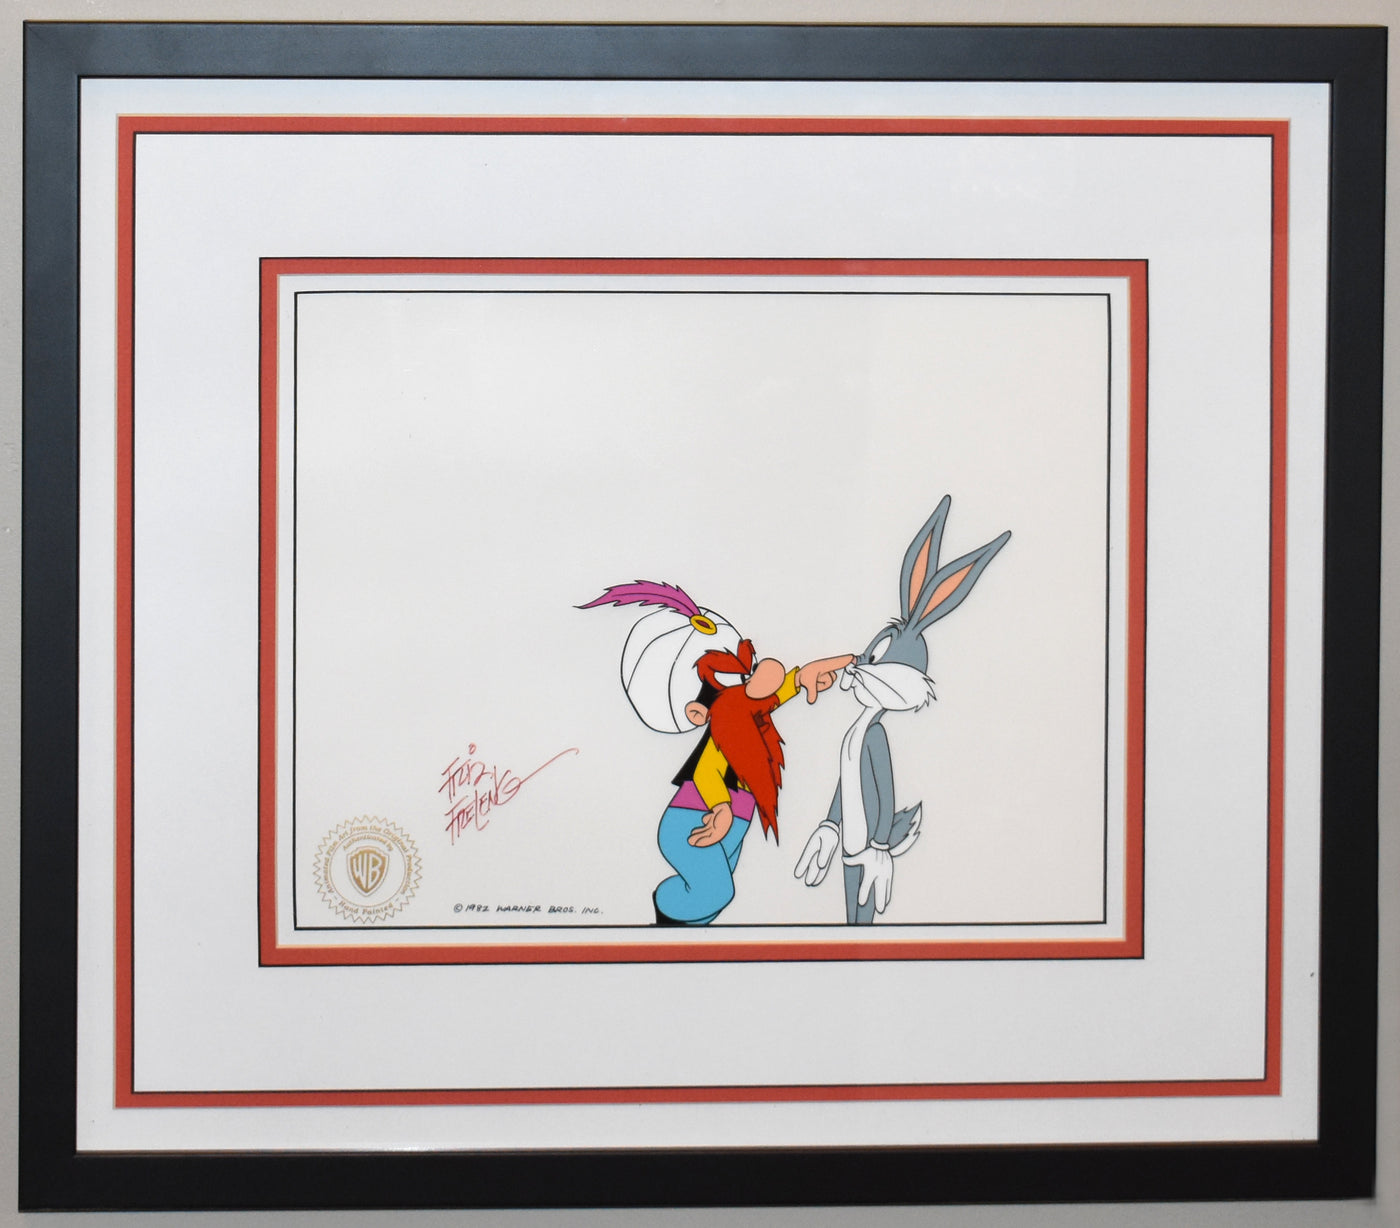 Original Warner Brothers Production Cel Featuring Bugs Bunny and Yosemite Sam from Rabbit Tales (1982), Signed by Friz Freleng